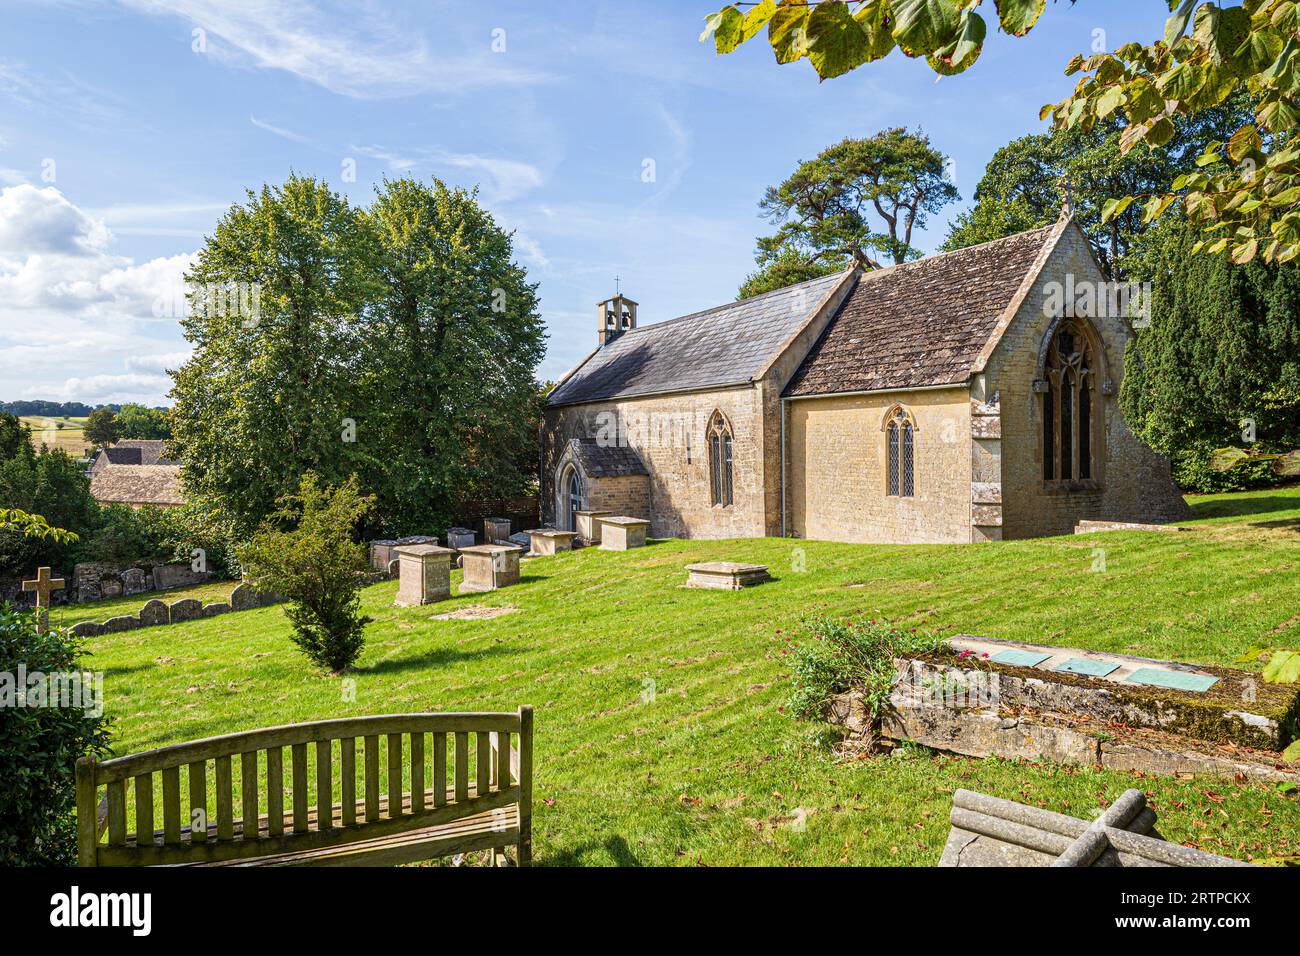 The church of St Peter, dating back to the 12th century, at Stratton near the Cotswold town of Cirencester, Gloucestershire, England UK Stock Photo